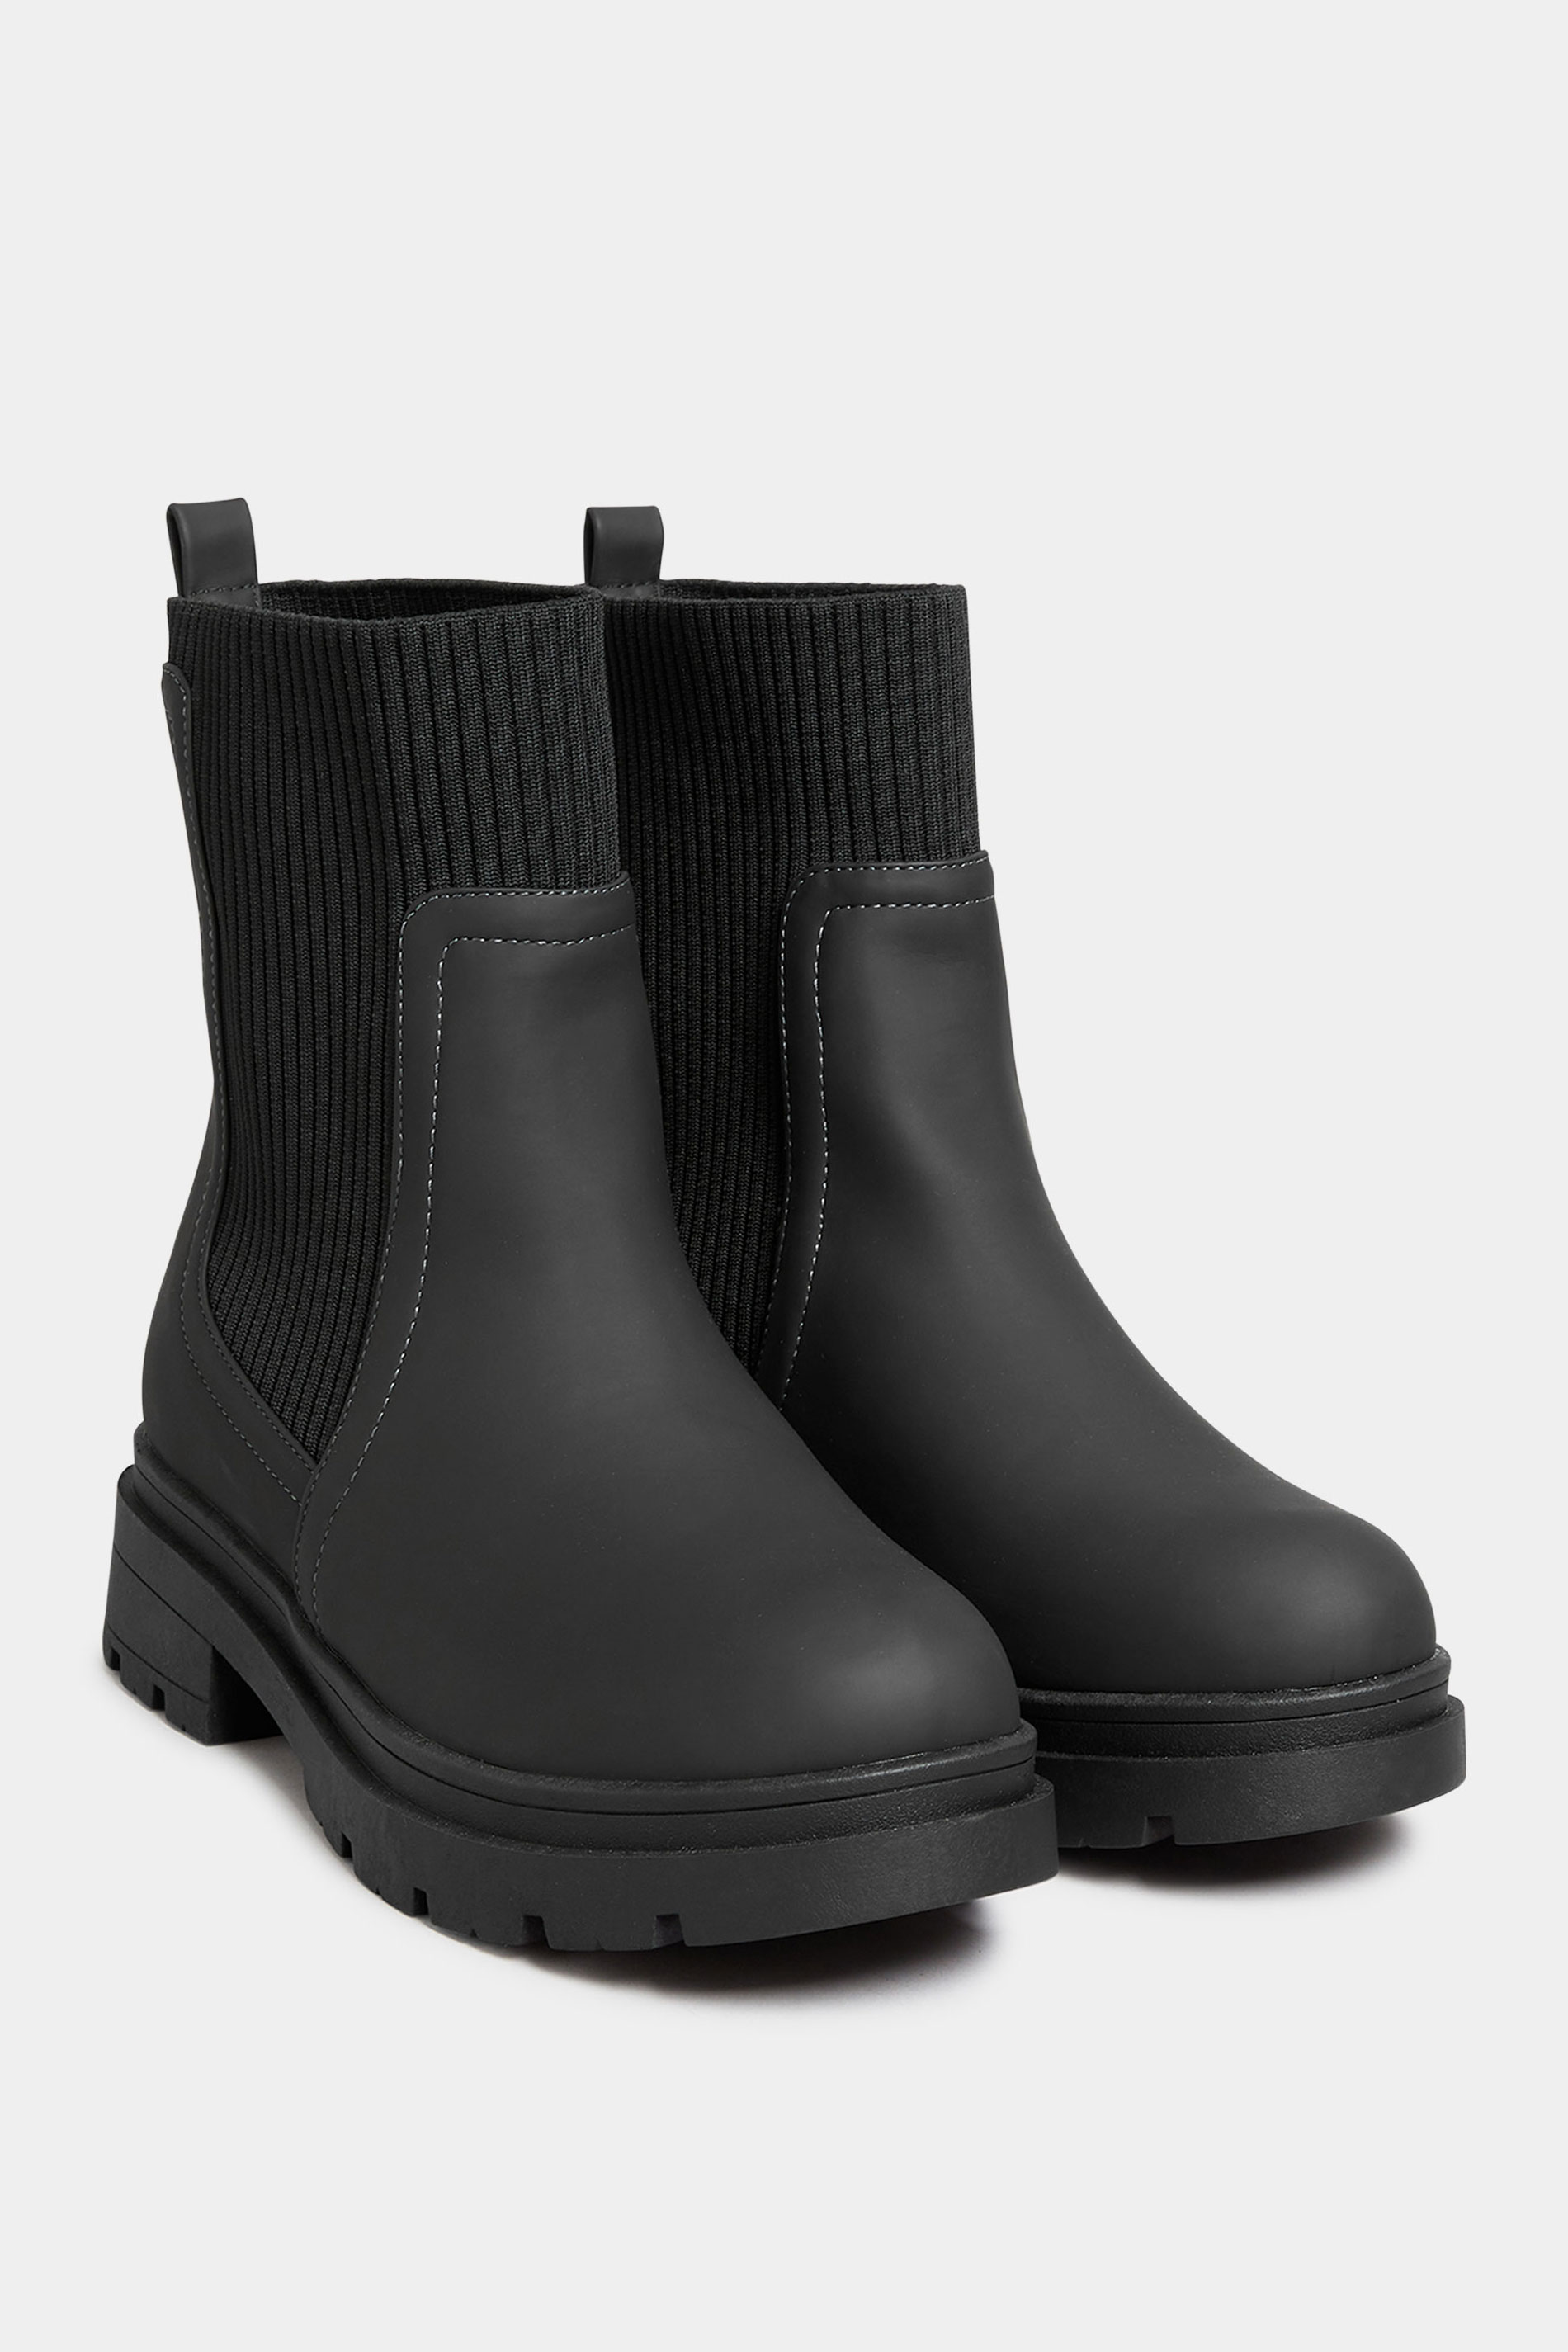 LIMITED COLLECTION Black Sock Chelsea Boots In Wide E Fit & Extra Wide EEE Fit | Yours Clothing 2